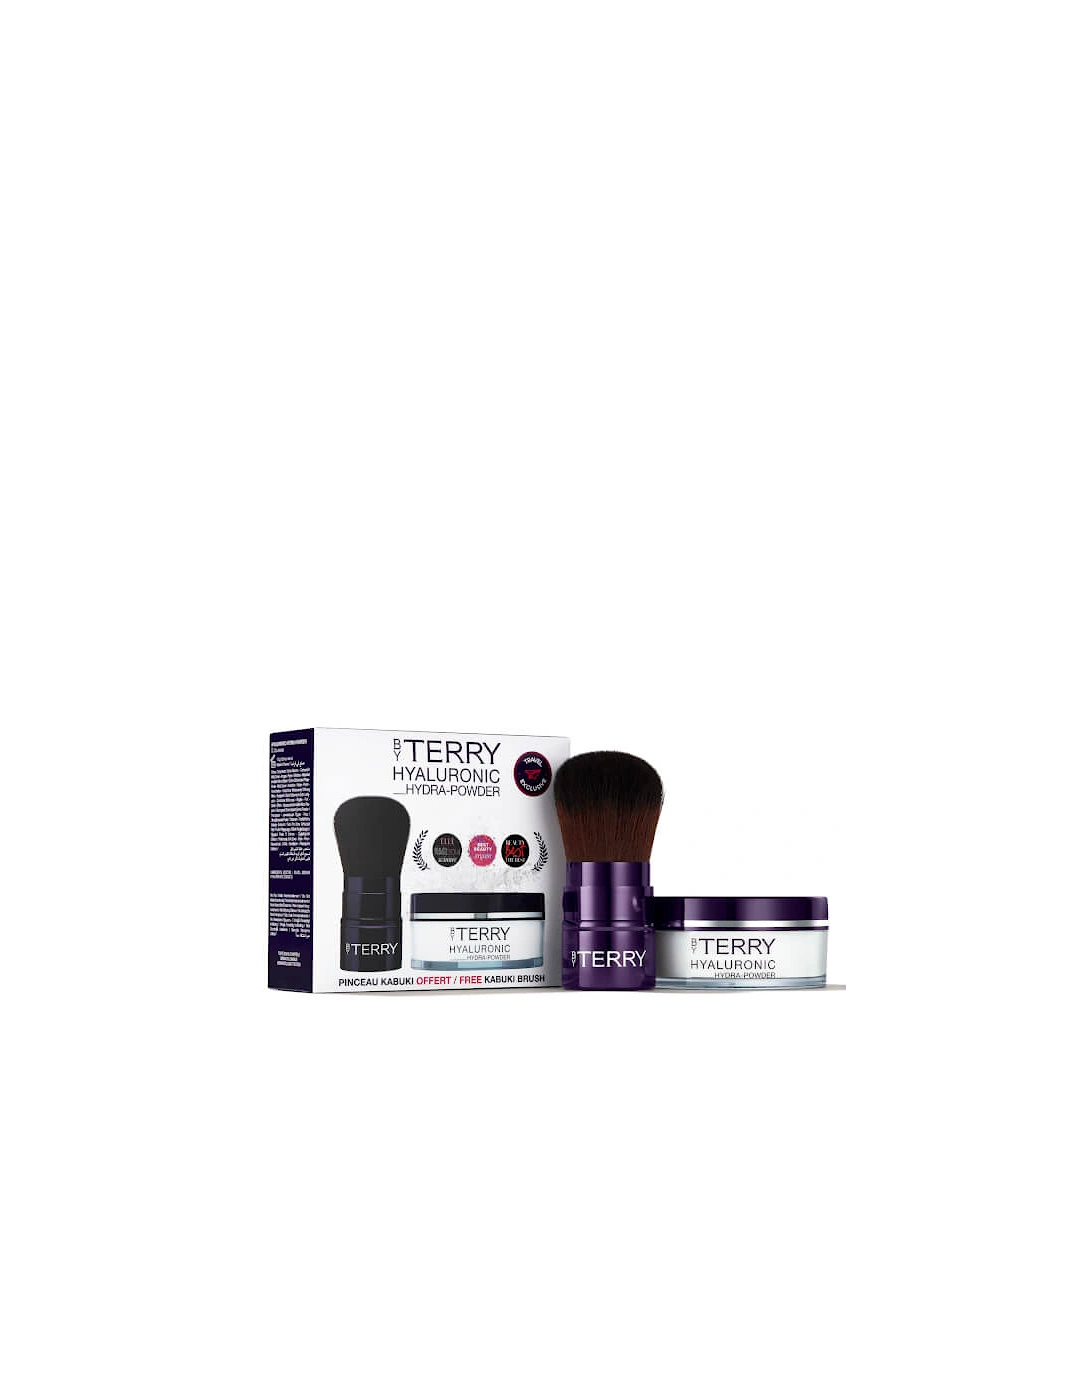 By Terry Exclusive Hyaluronic Hydra Powder and Kabuki Brush Set (Worth £77.00), 2 of 1